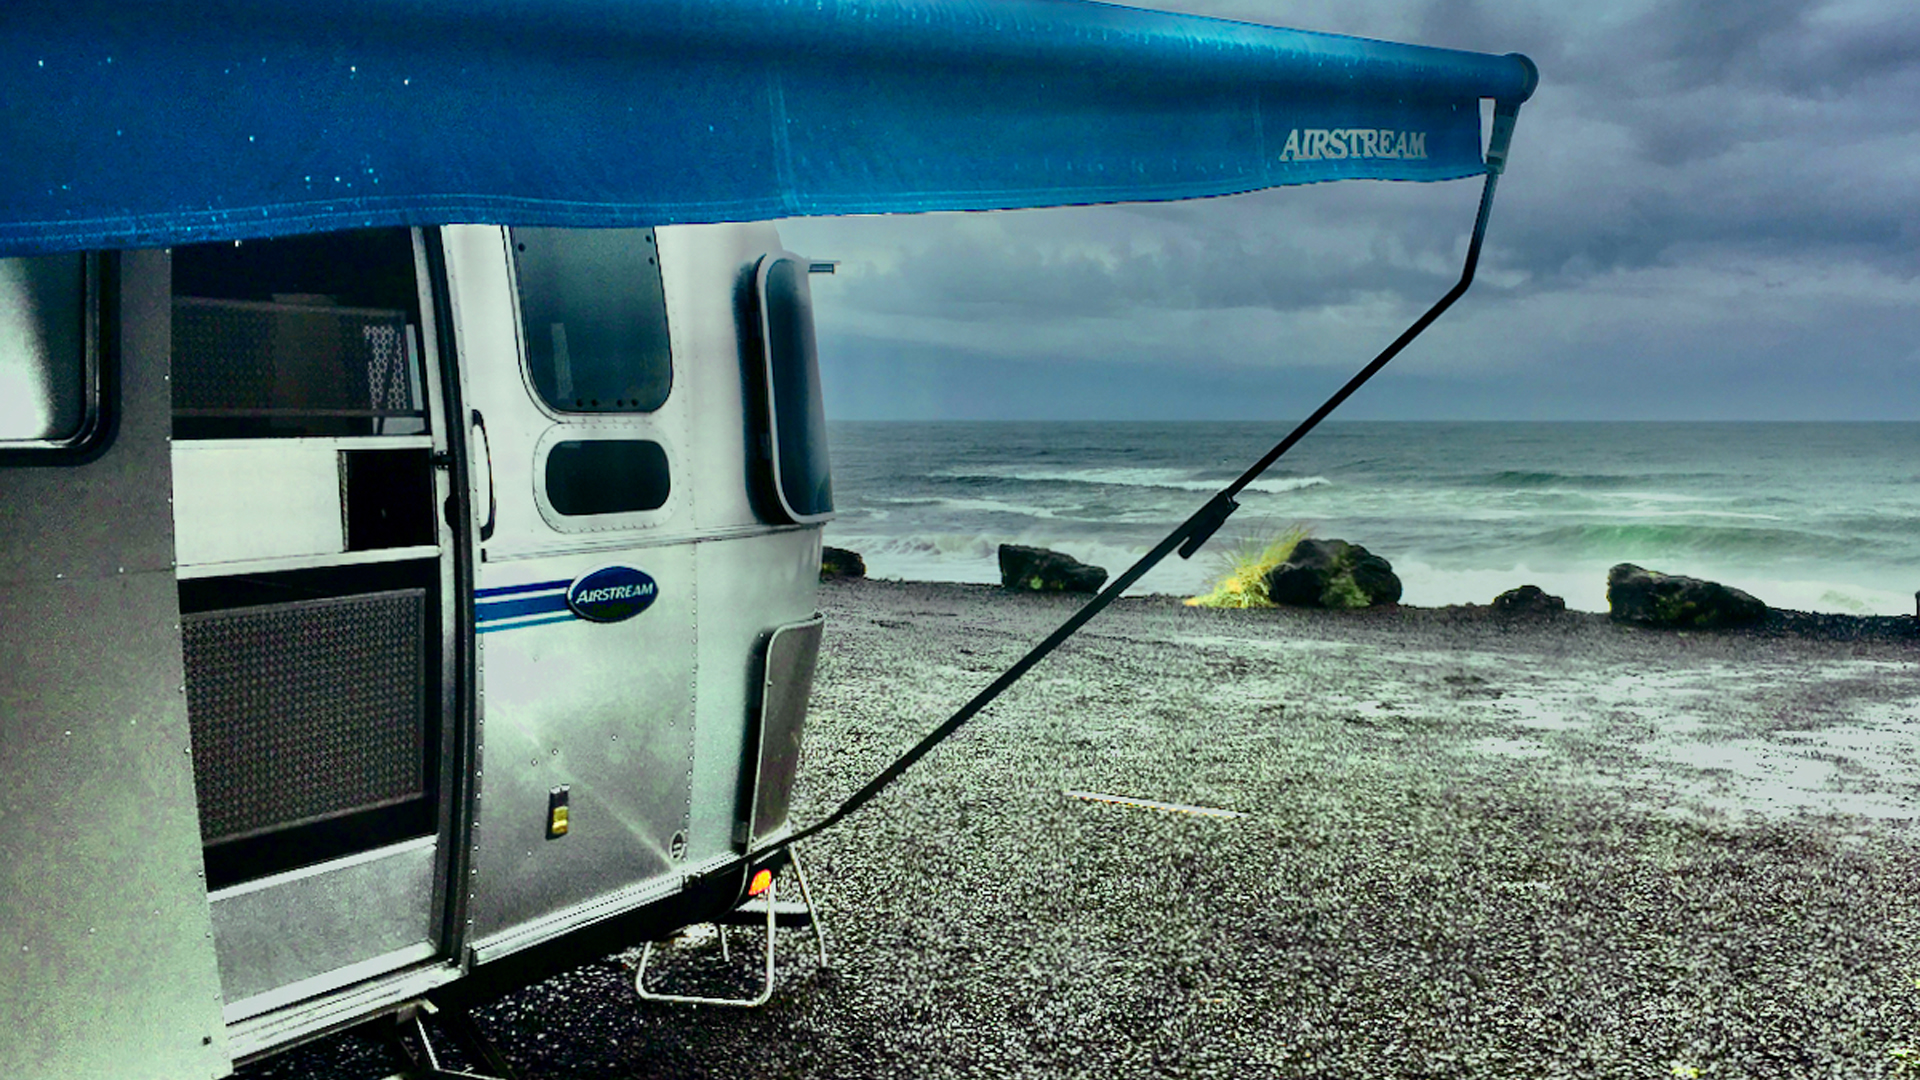 Airstream Travel Trailer parked in the sand at a beach